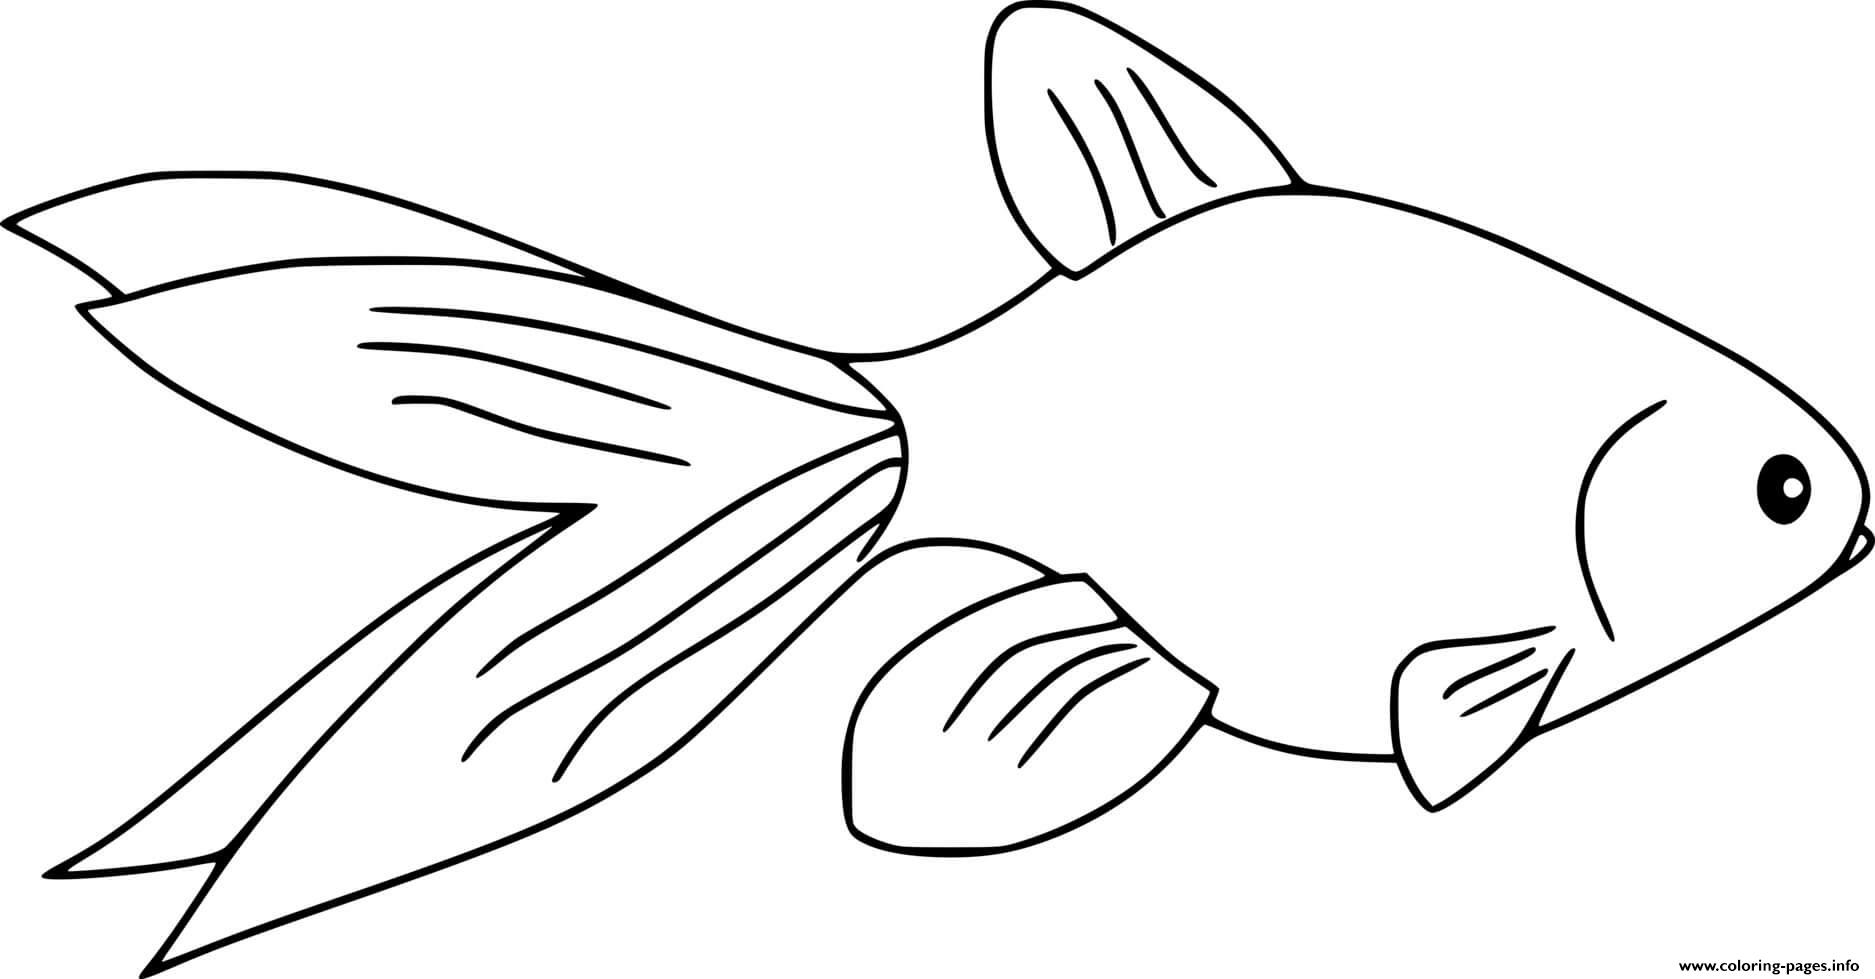 Common Goldfish coloring pages